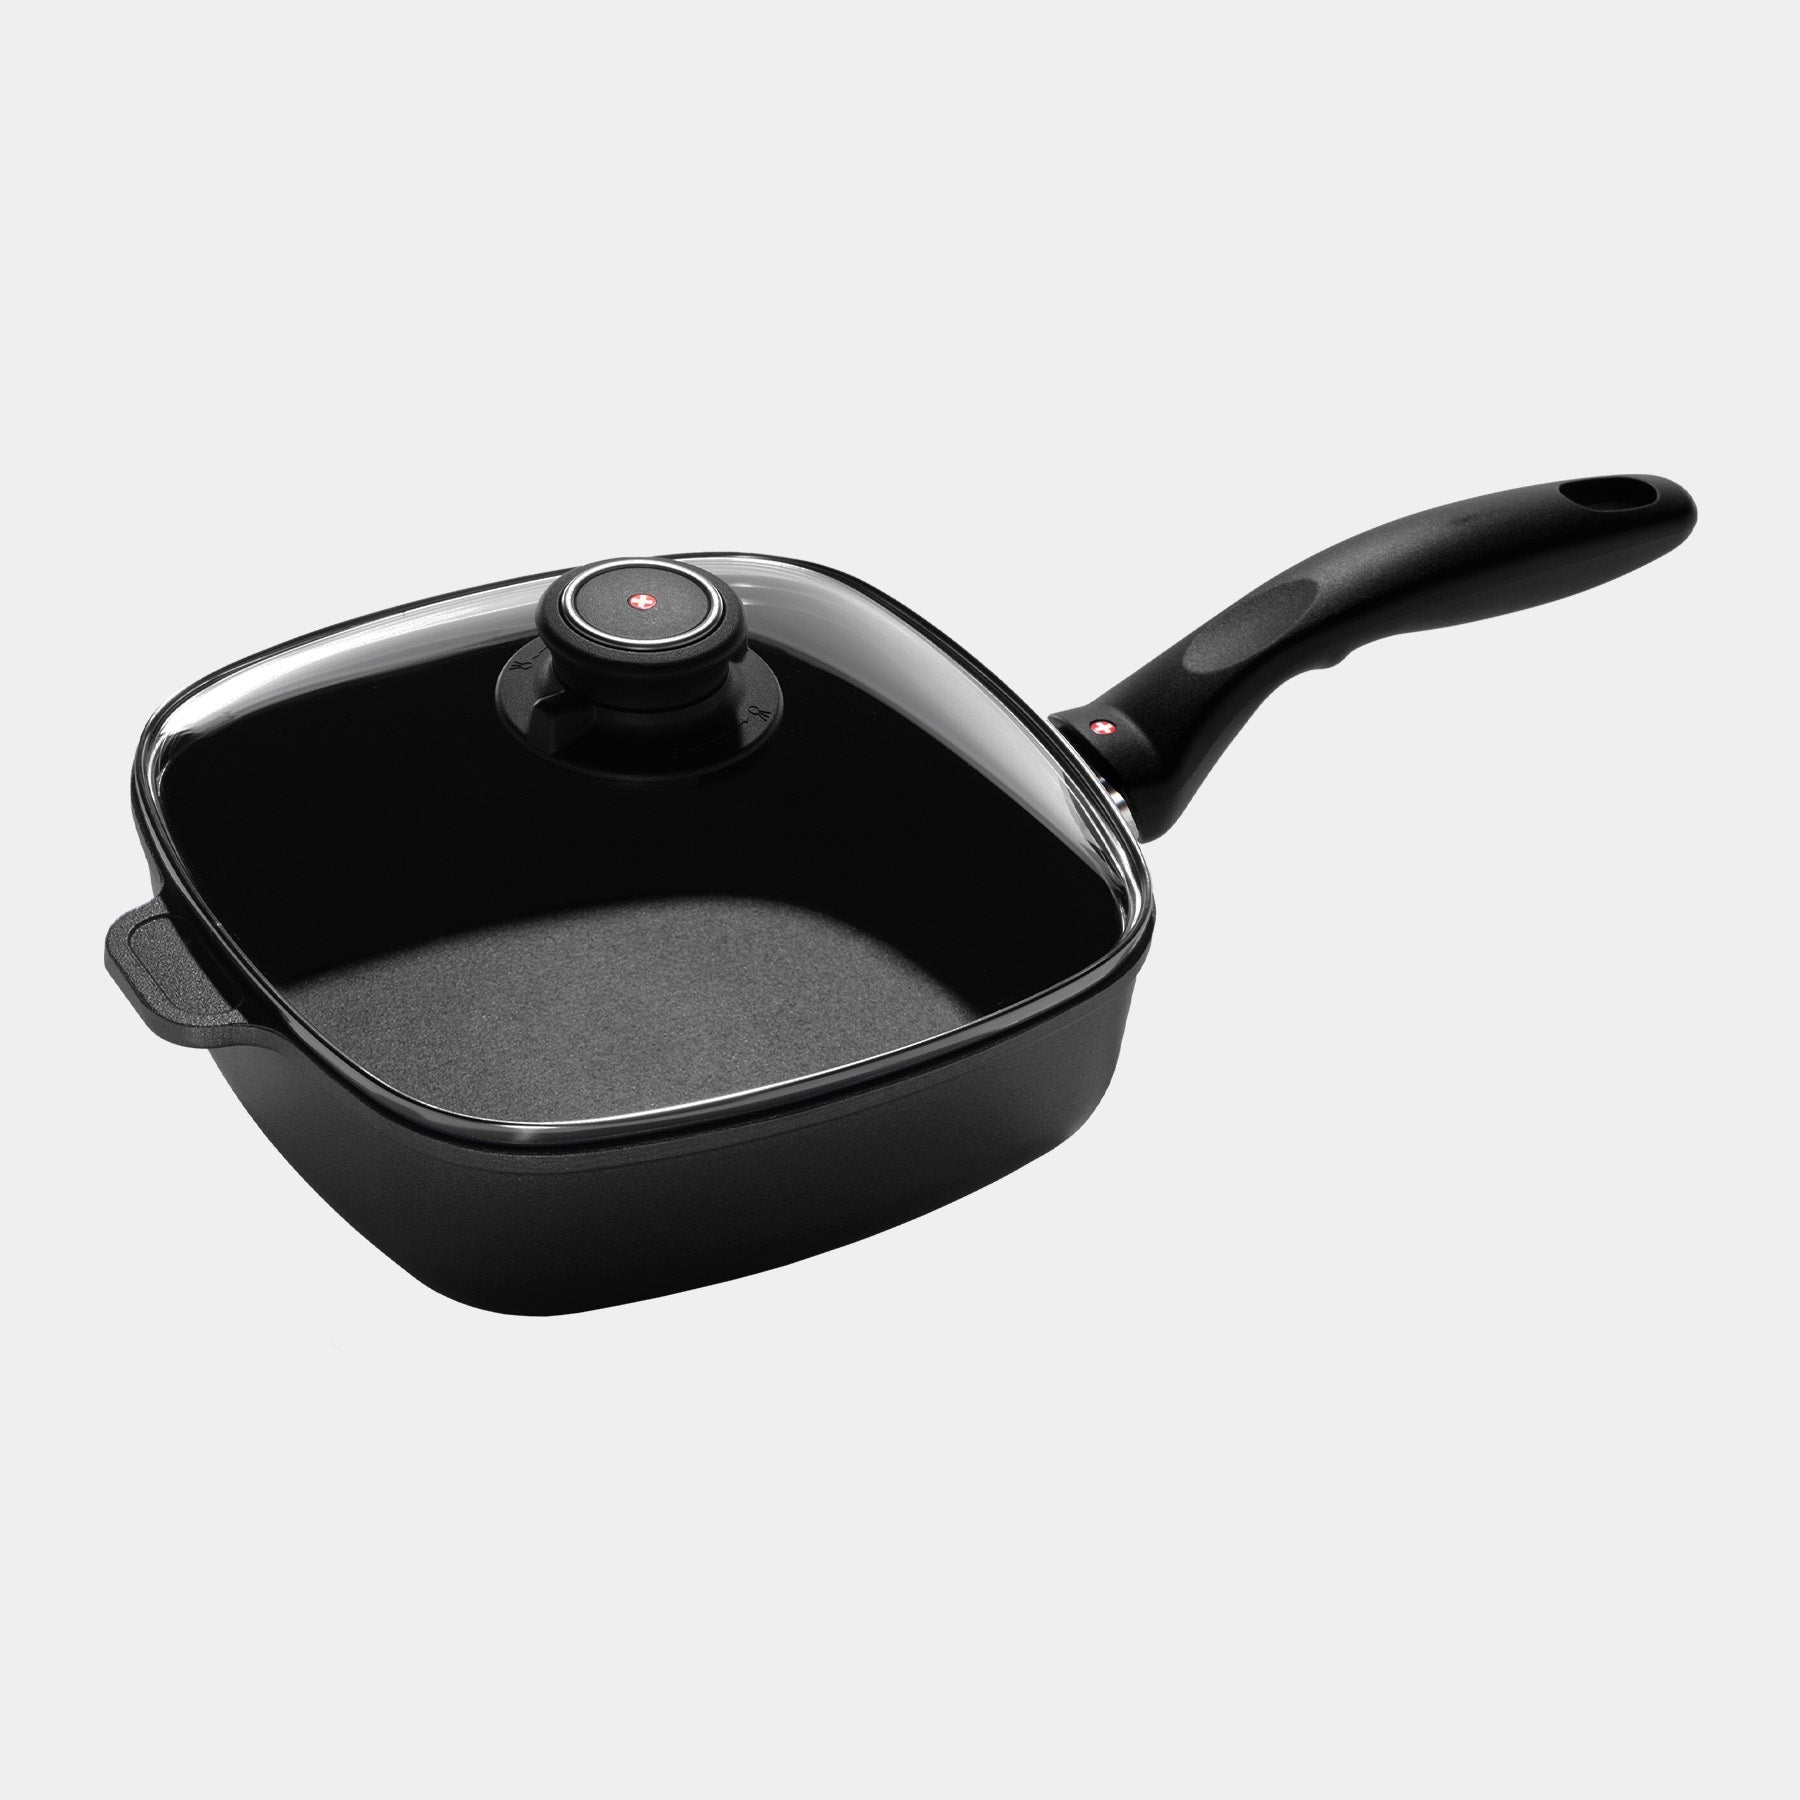 XD Nonstick 8" x 8" Square Saute Pan with Glass Lid - Top View